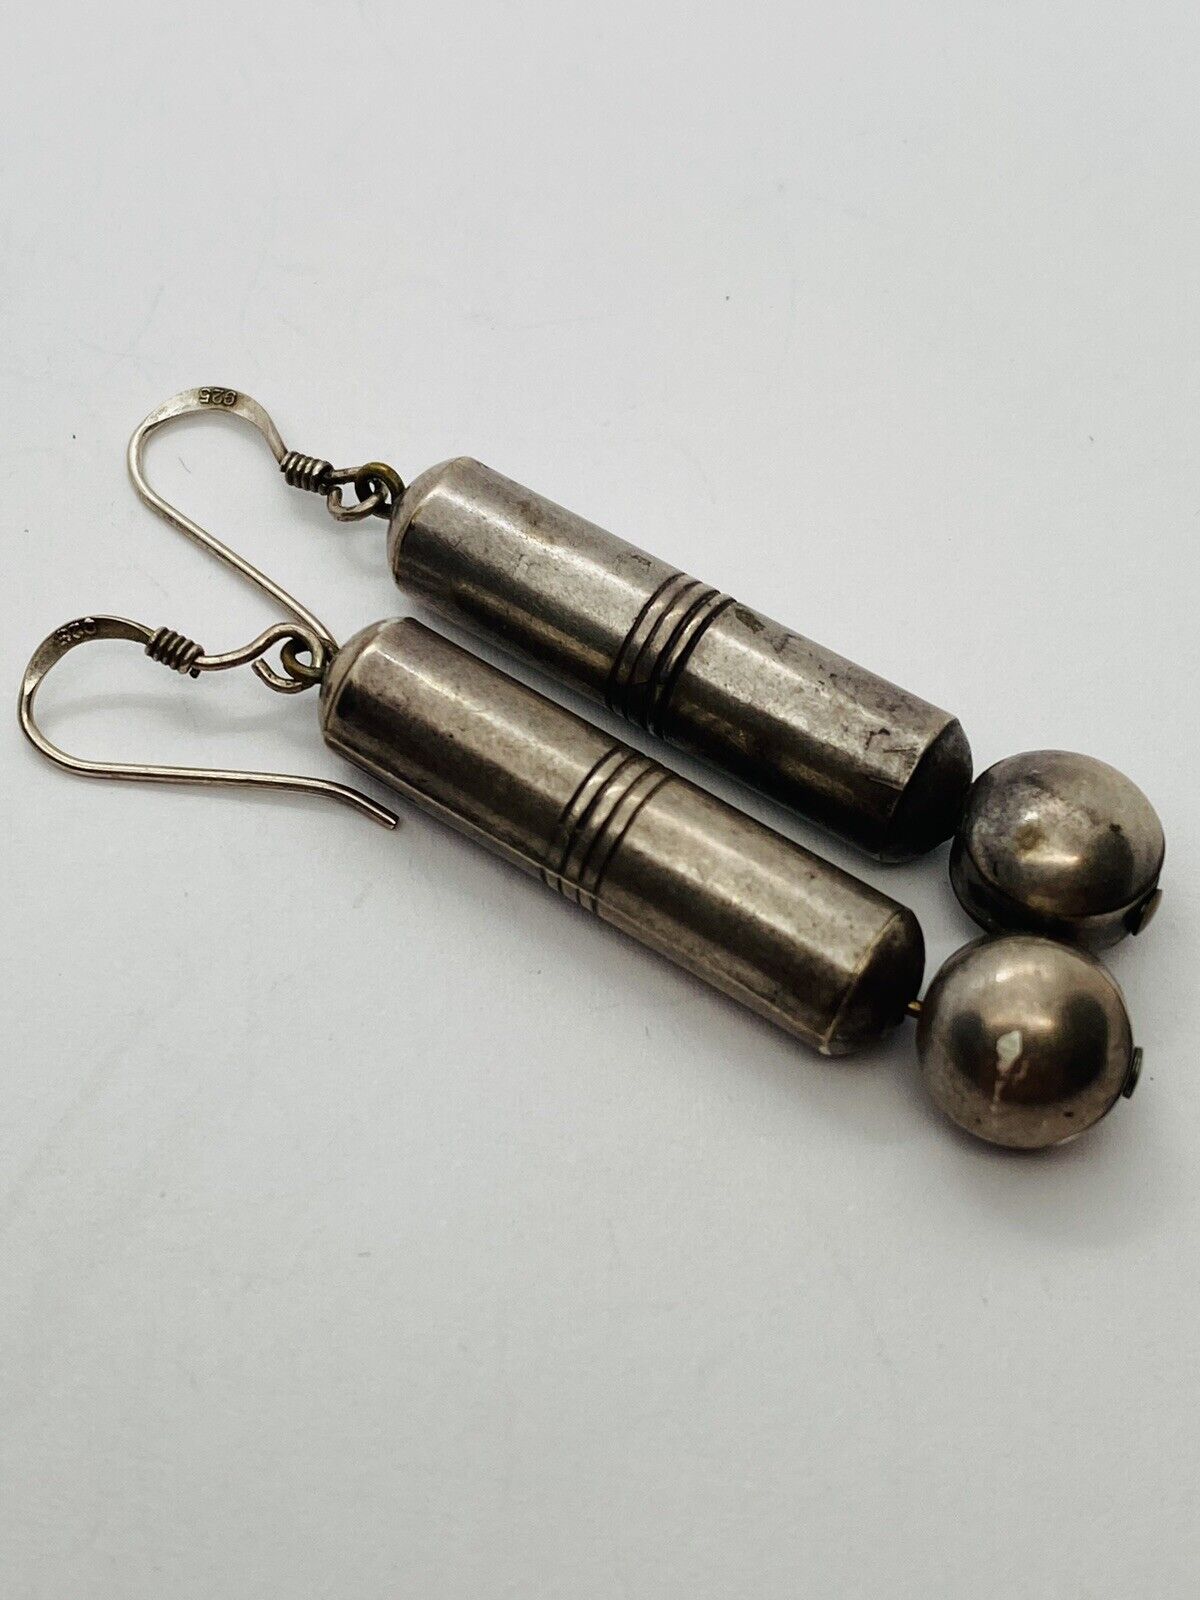 5g 925 STERLING SILVER PILLAR BALL ARTISAN STAMPED VINTAGE EARRINGS UNIQUE